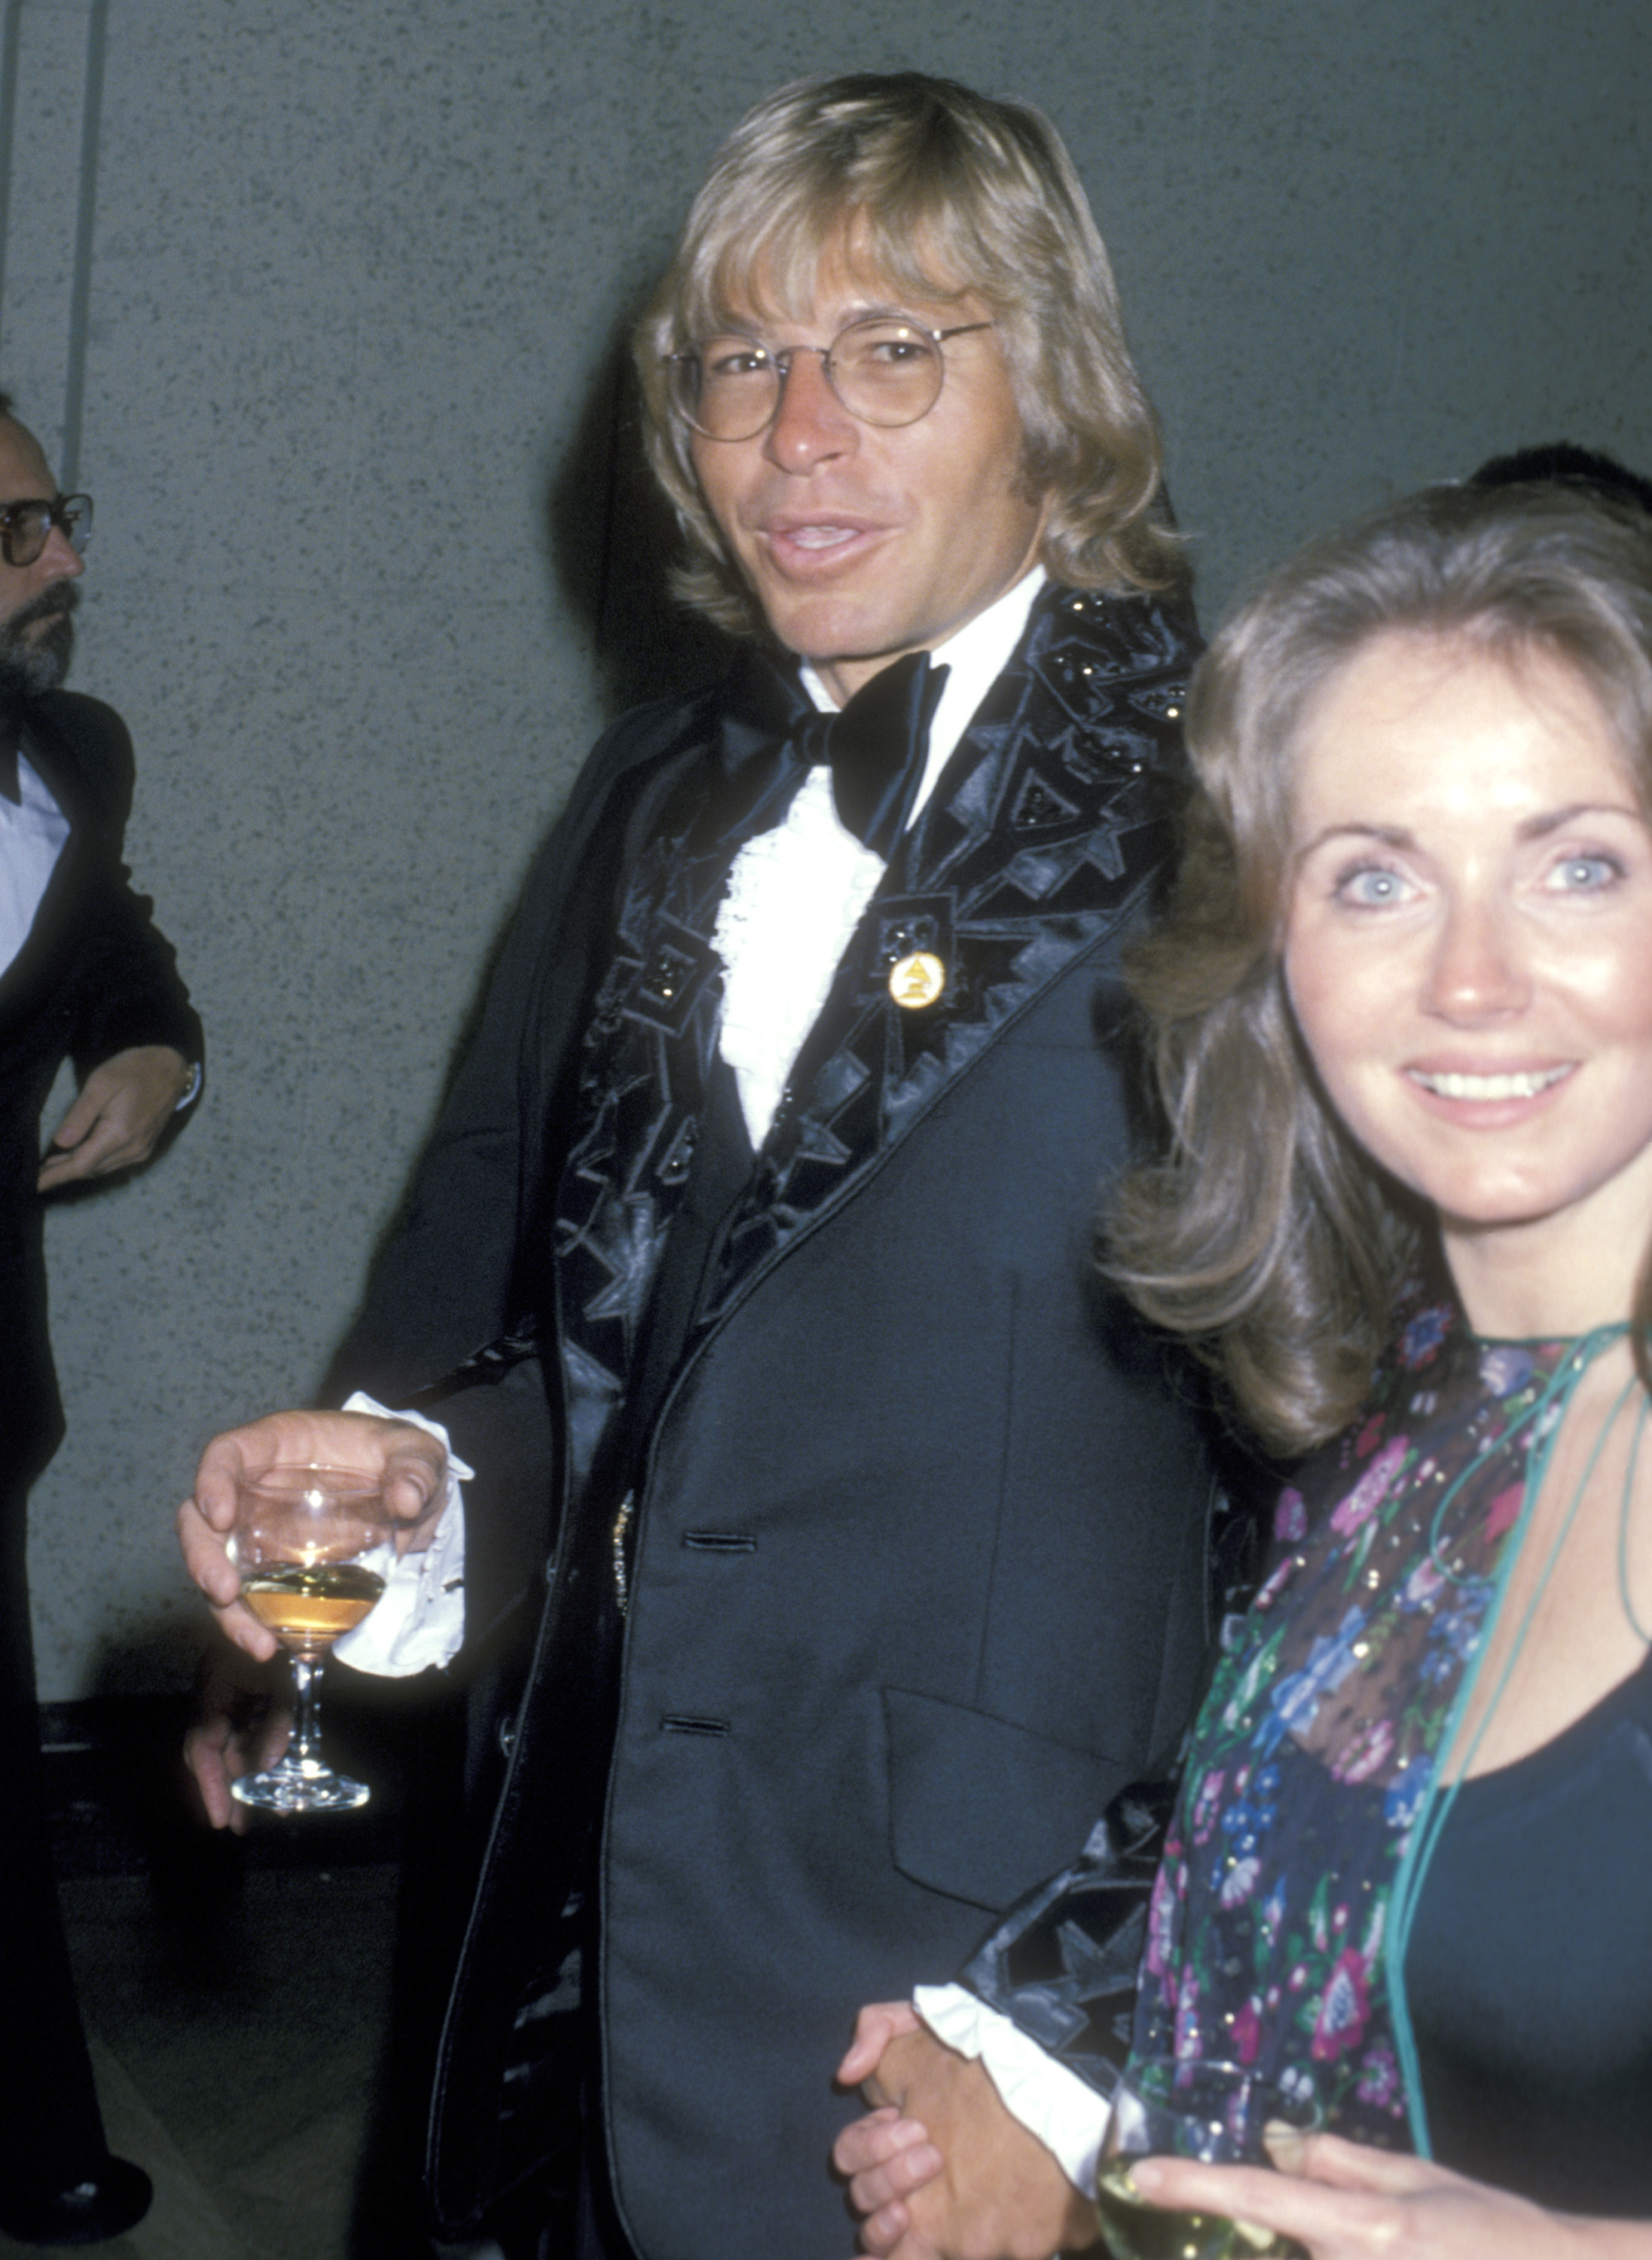 John Denver and Annie Martell at the 20th Annual Grammy Awards on February 23, 1978, in Los Angeles, California. | Source: Getty Images